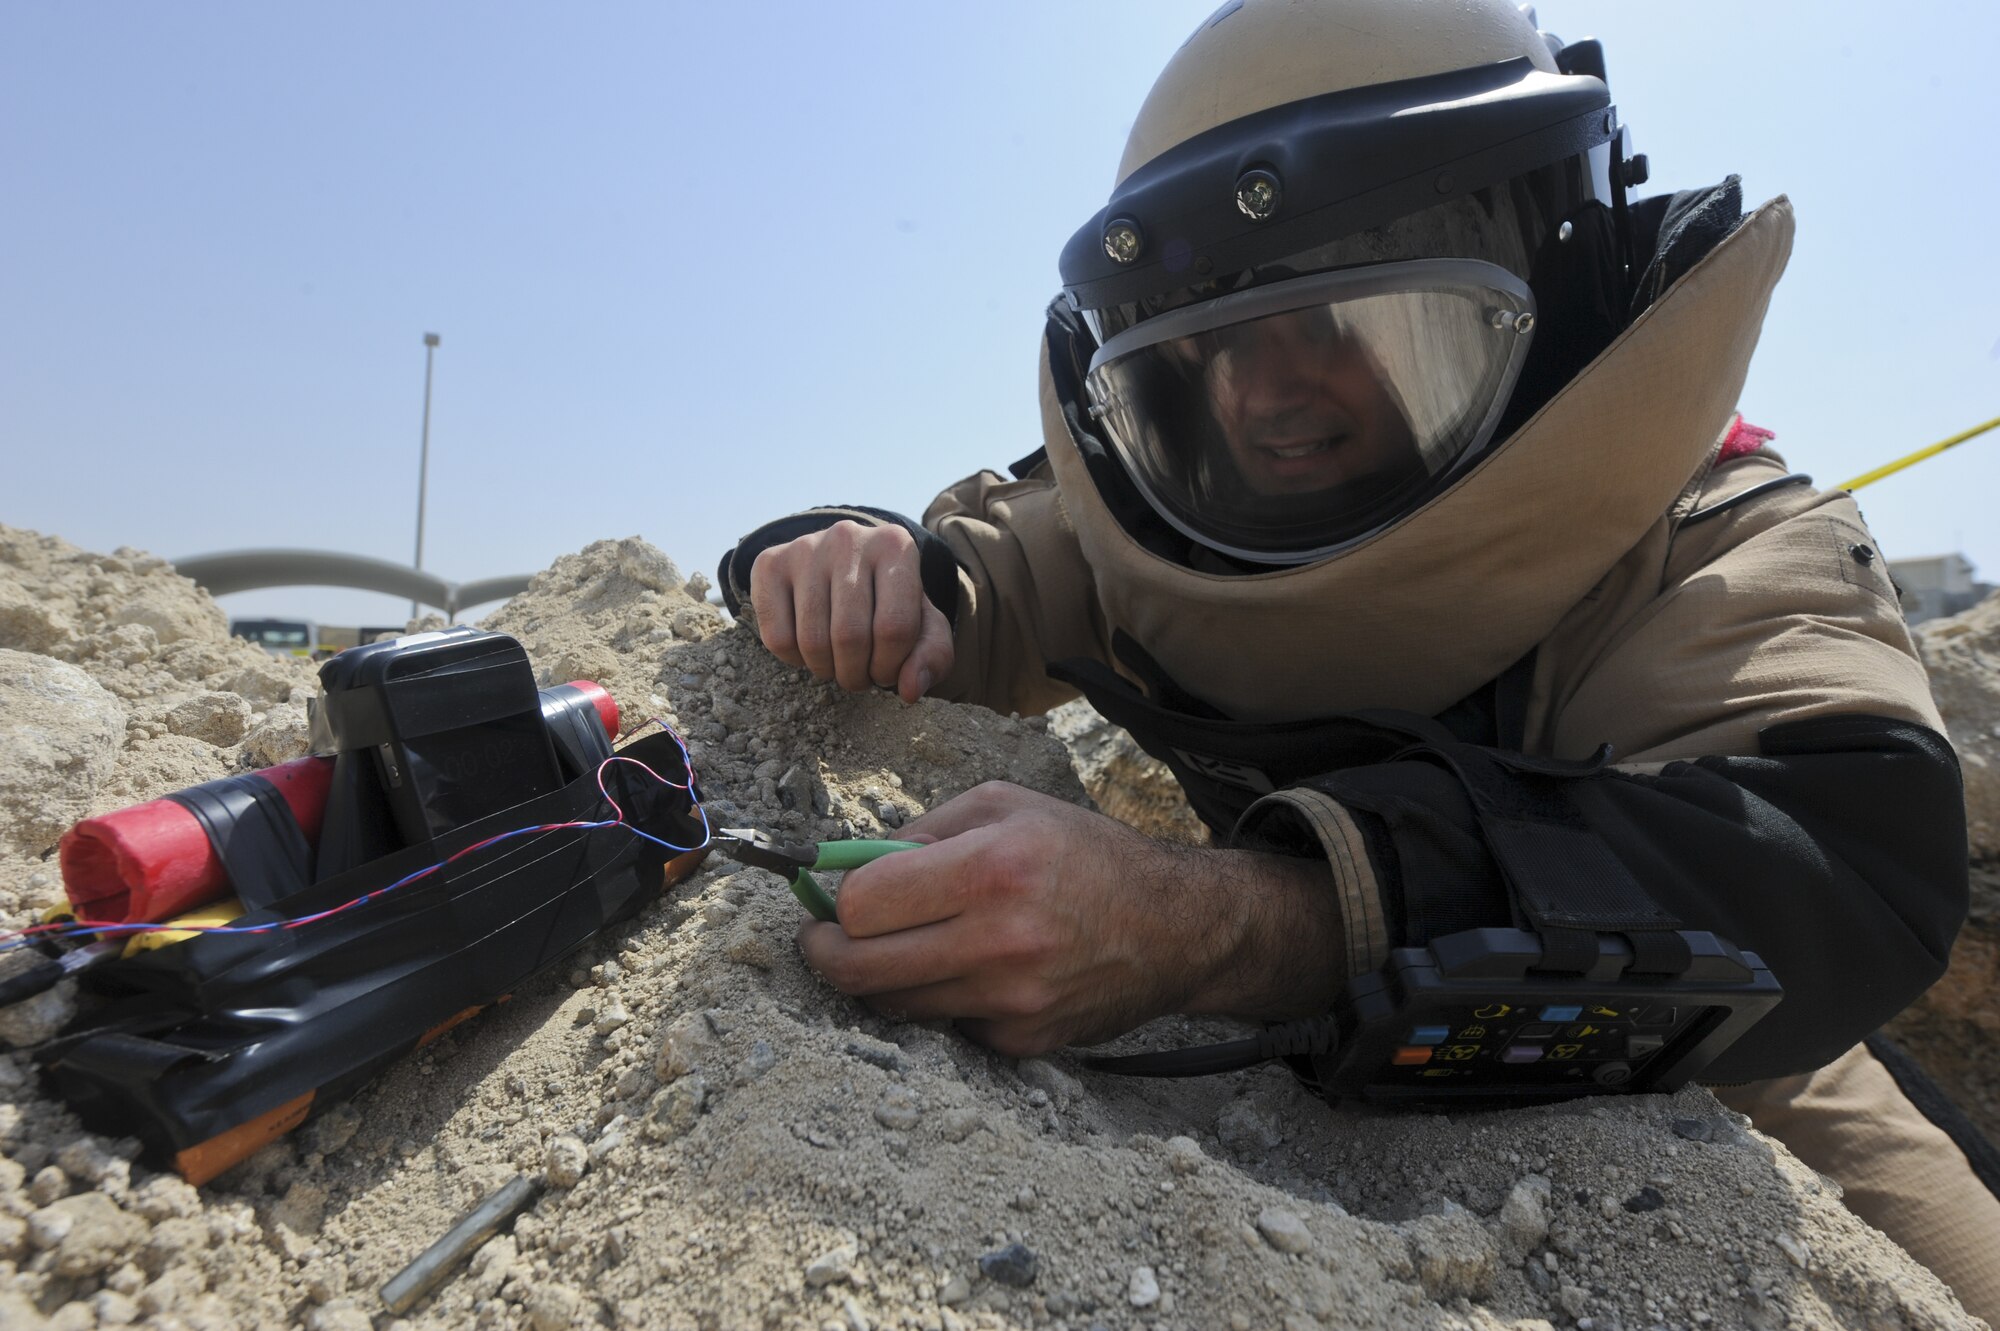 U.S. Air Force Staff Sgt. Andrew Roberts, 380th Expeditionary Civil Engineer Squadron explosive ordnance disposal technician, disables a training improvised explosive device at an undisclosed location in Southwest Asia July 25, 2013. The 380th Air Expeditionary Wing EOD team is responsible for disabling conventional munitions and IEDs. Roberts calls Blanchard, Idaho, home and is deployed from Fairchild Air Force Base, Wash. (U.S. Air Force photo by Senior Airman Jacob Morgan)